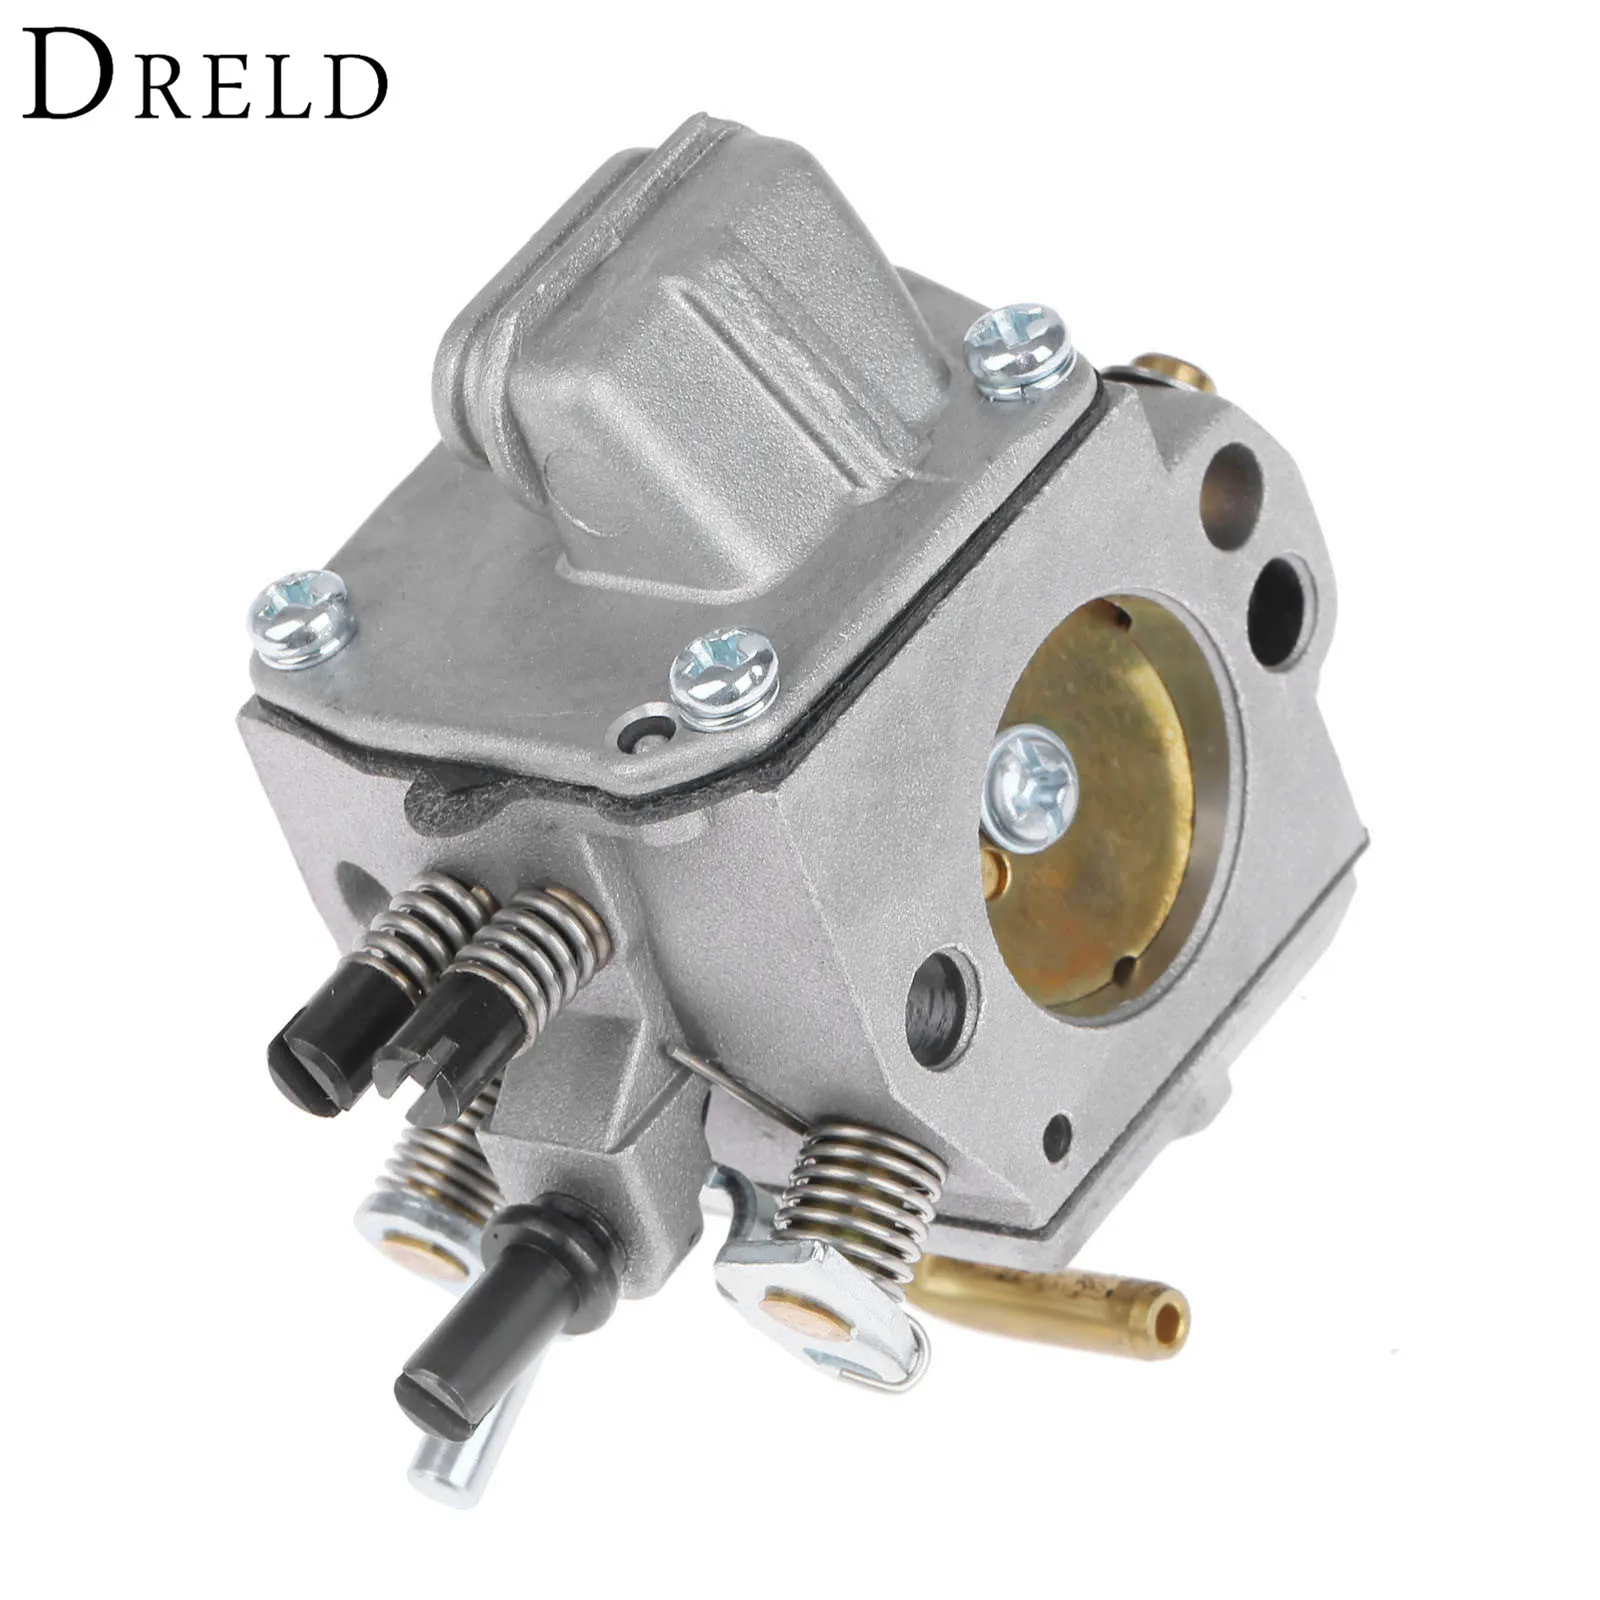 

DRELD Chainsaw Carburetor Carb For STIHL 029 039 MS290 MS310 MS390 MS 290 310 390 Chainsaw Spare Parts Replace# 1127 120 0650